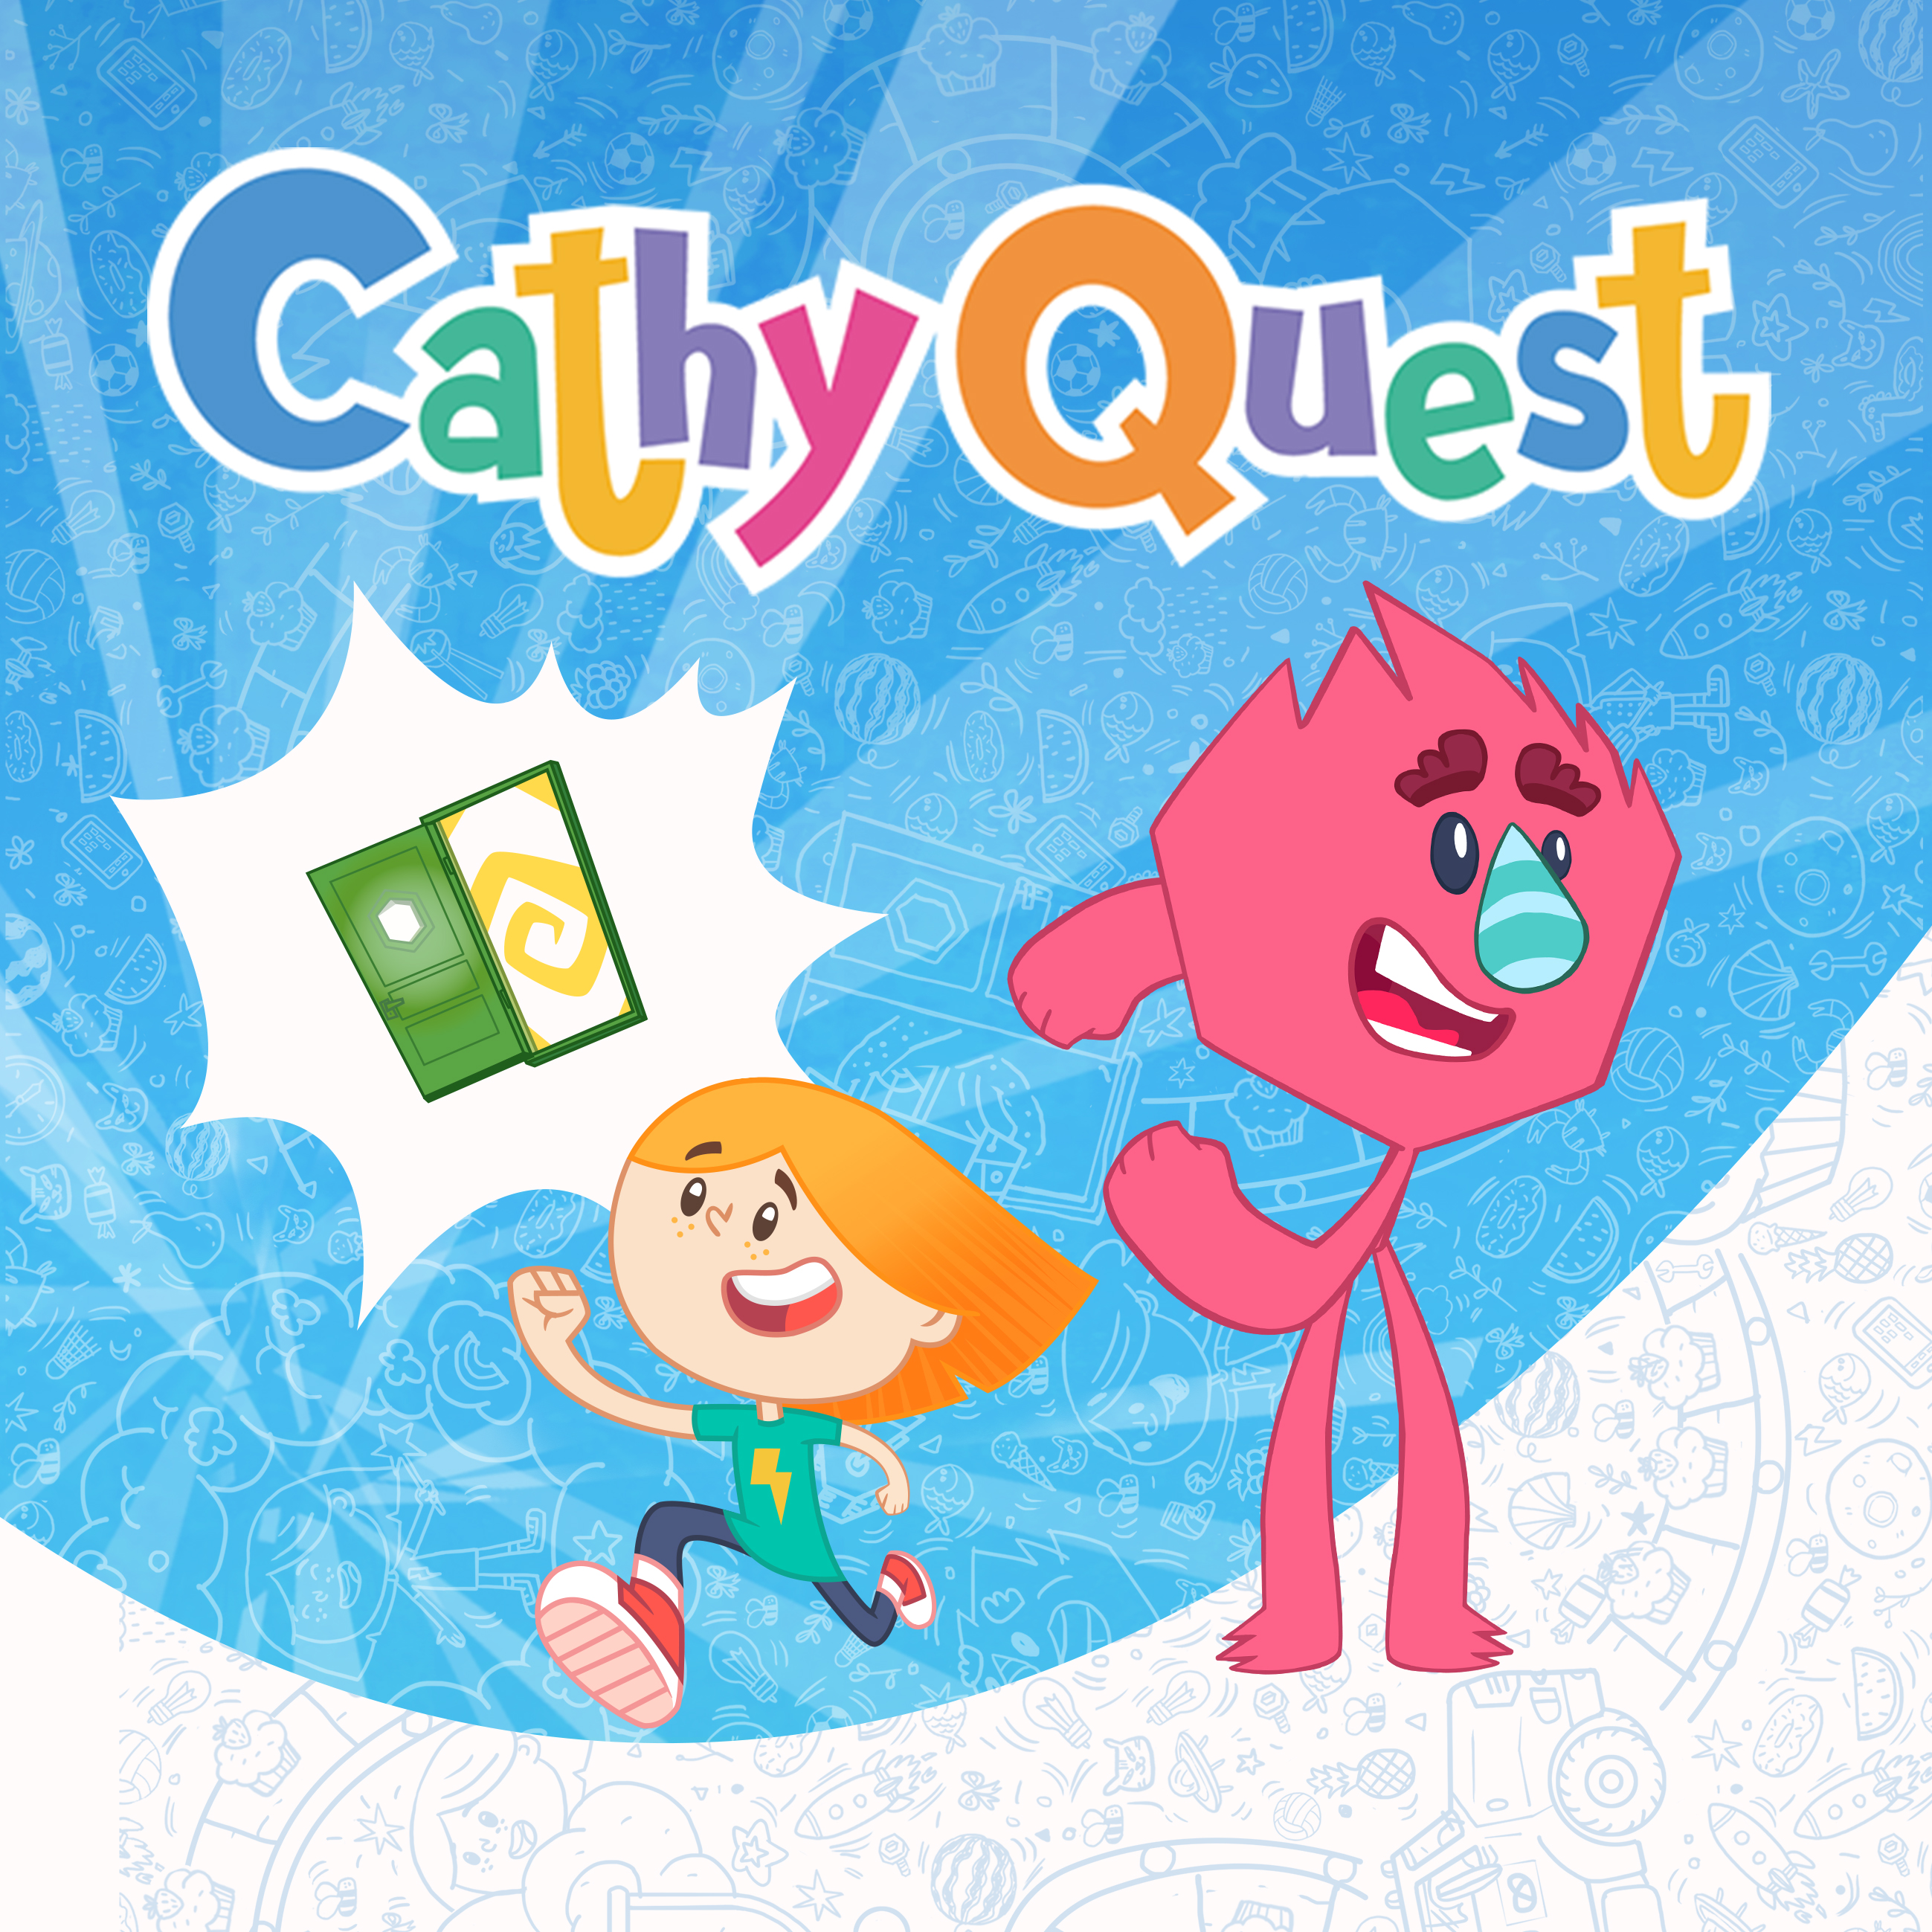 'Cathy quest' cartoon poster